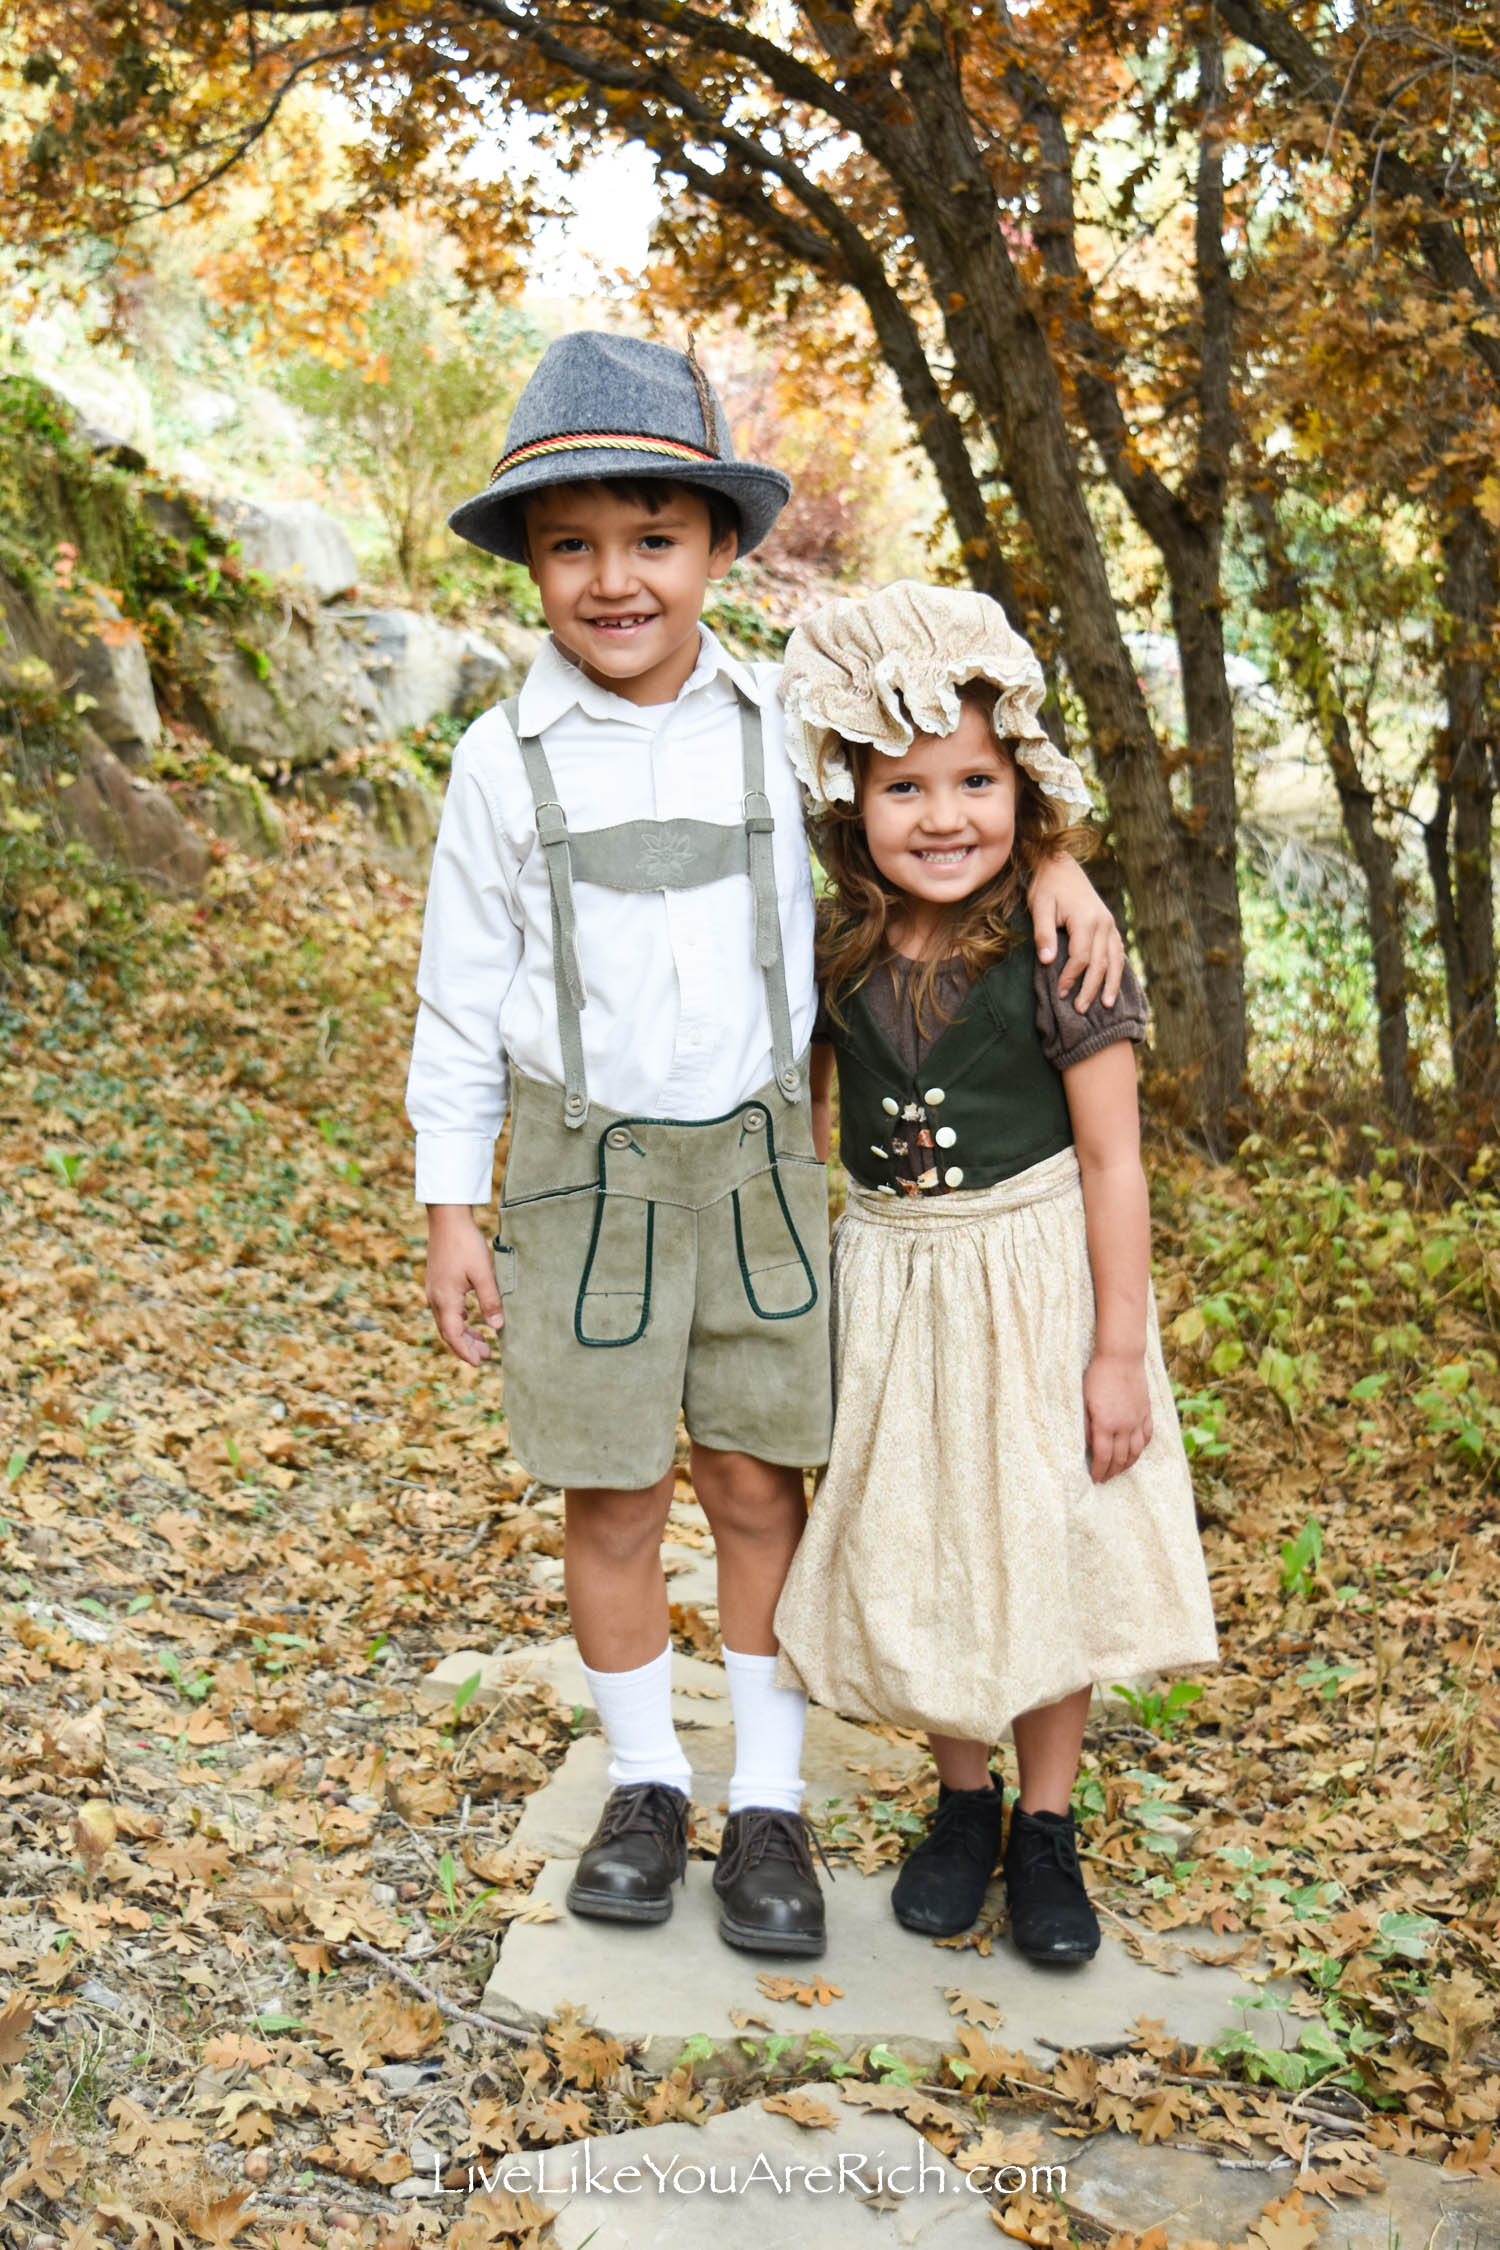 Hansel and Gretel Costumes—Grimm's Fairytales